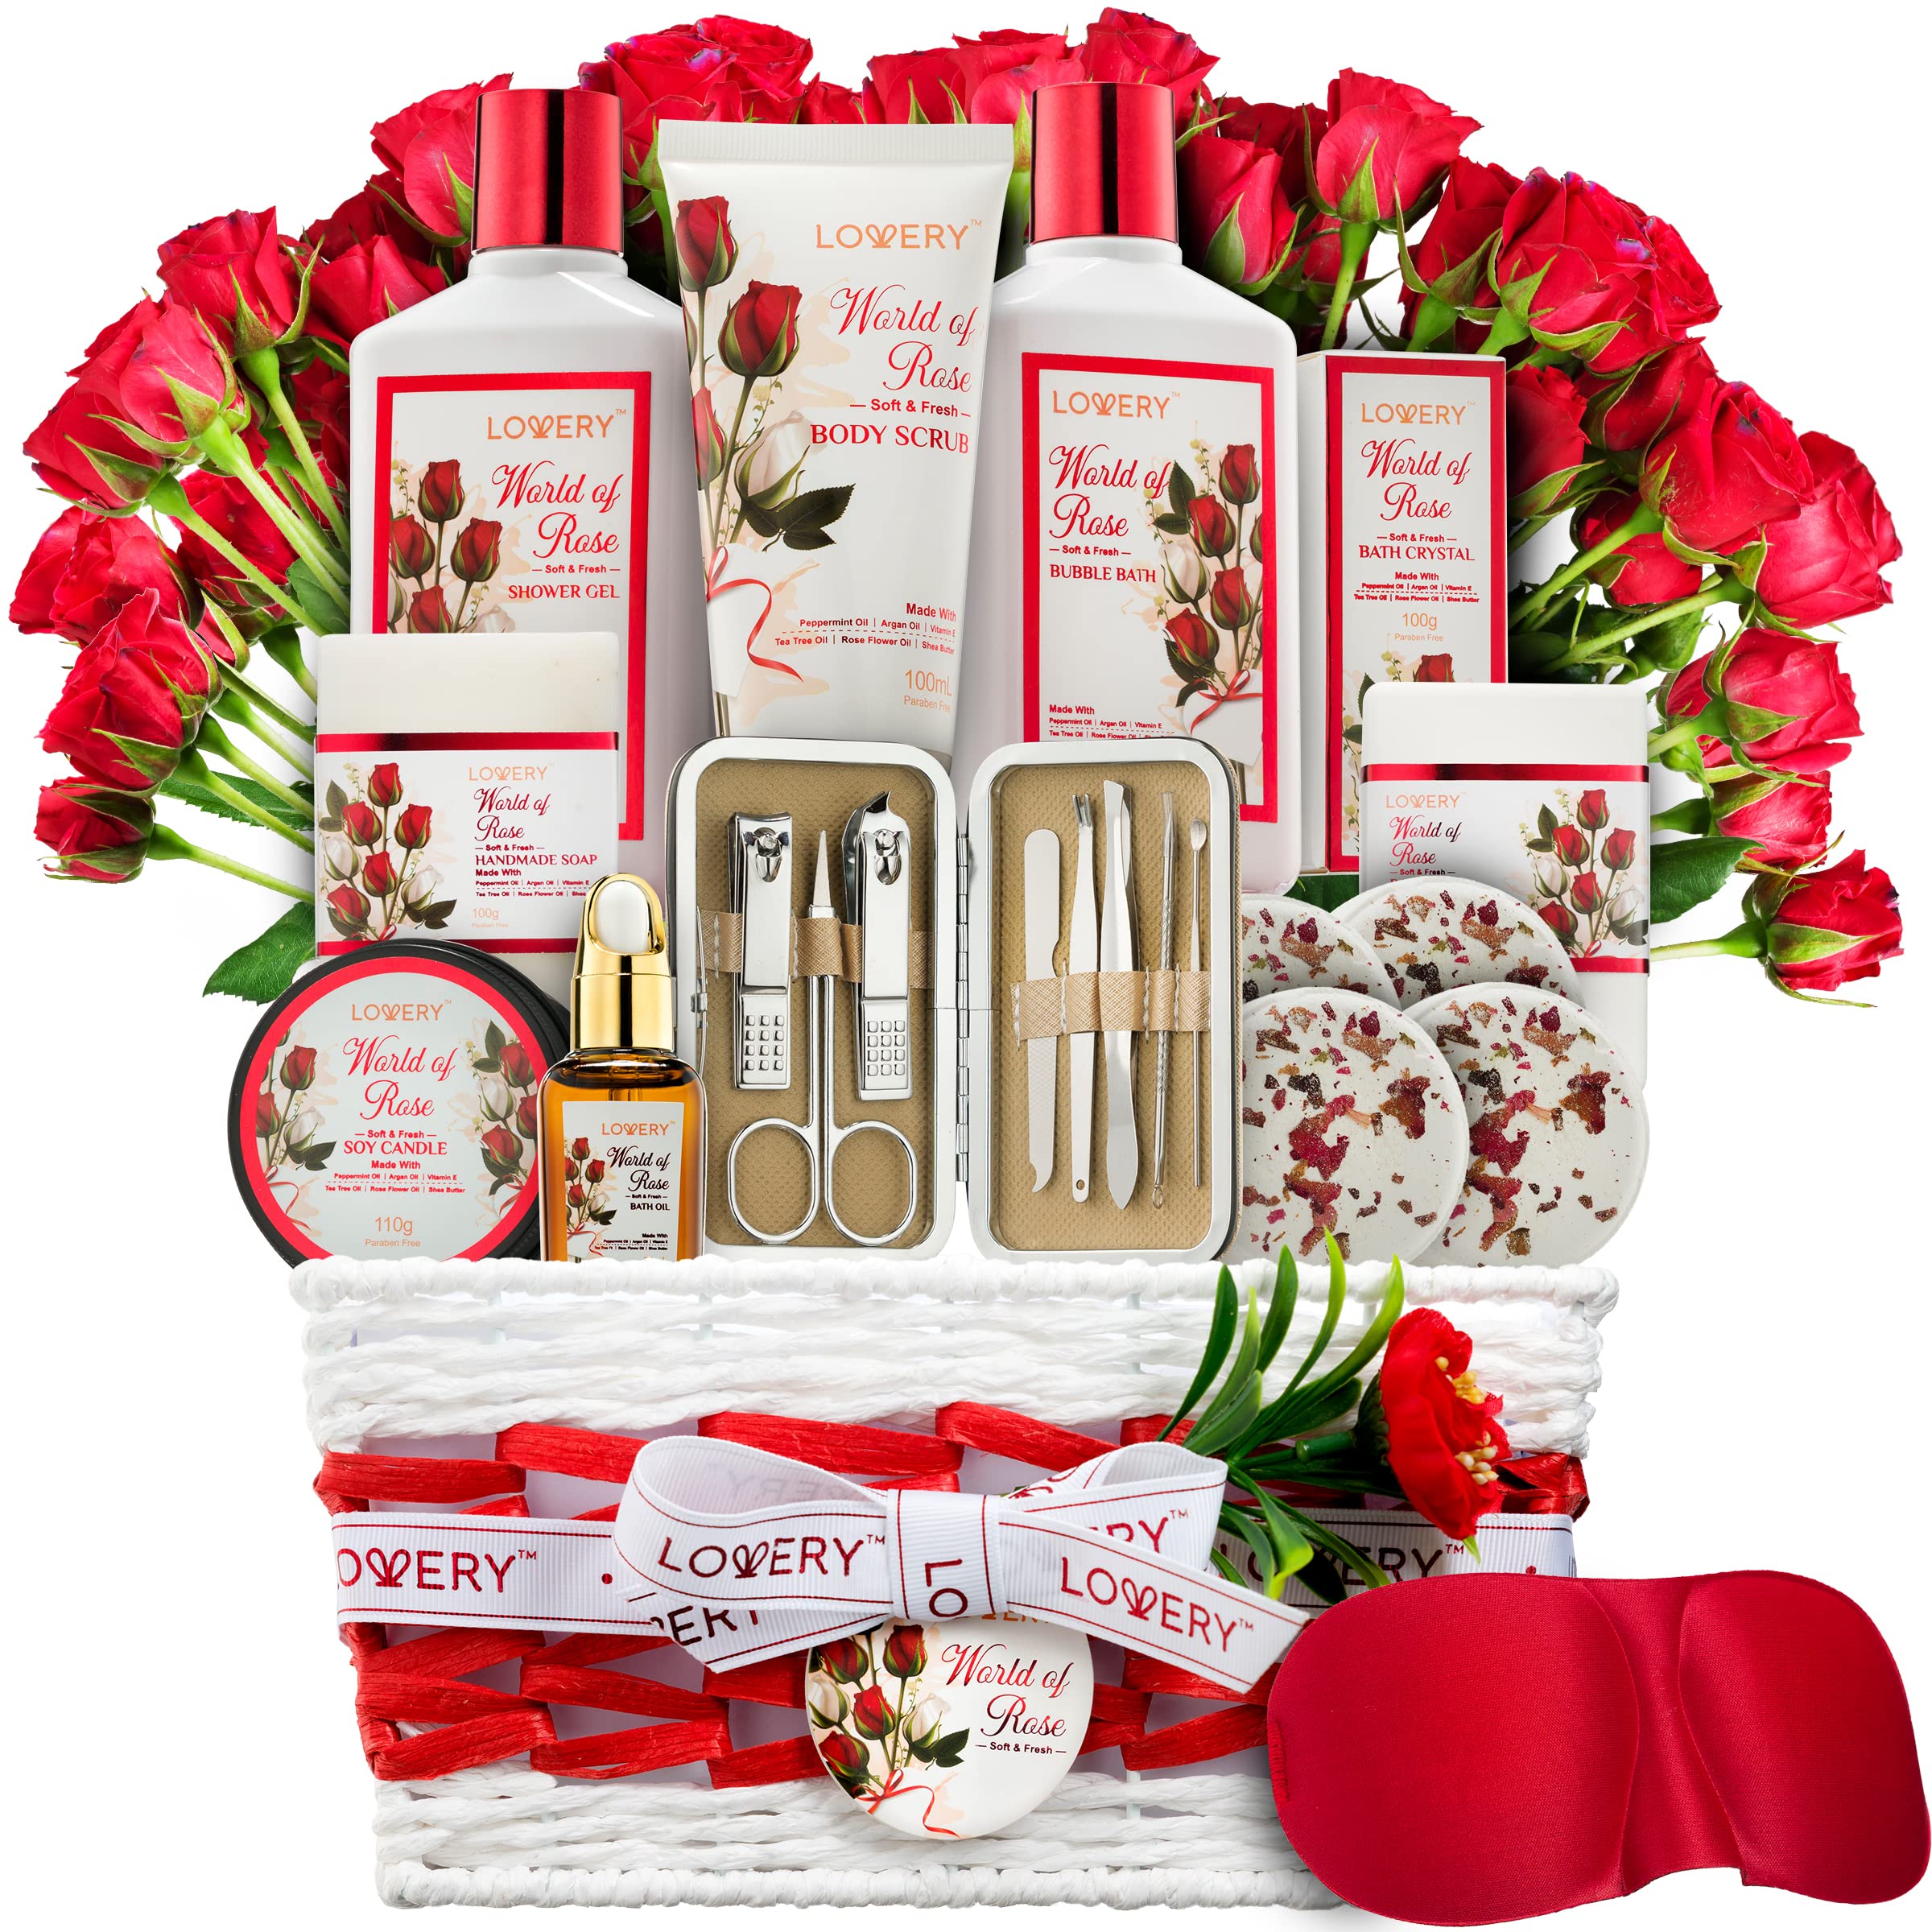 Spa Gifts for Women, Bath and Body Gift Set, Red Rose Gift Basket, 35Piece  Stress Relief